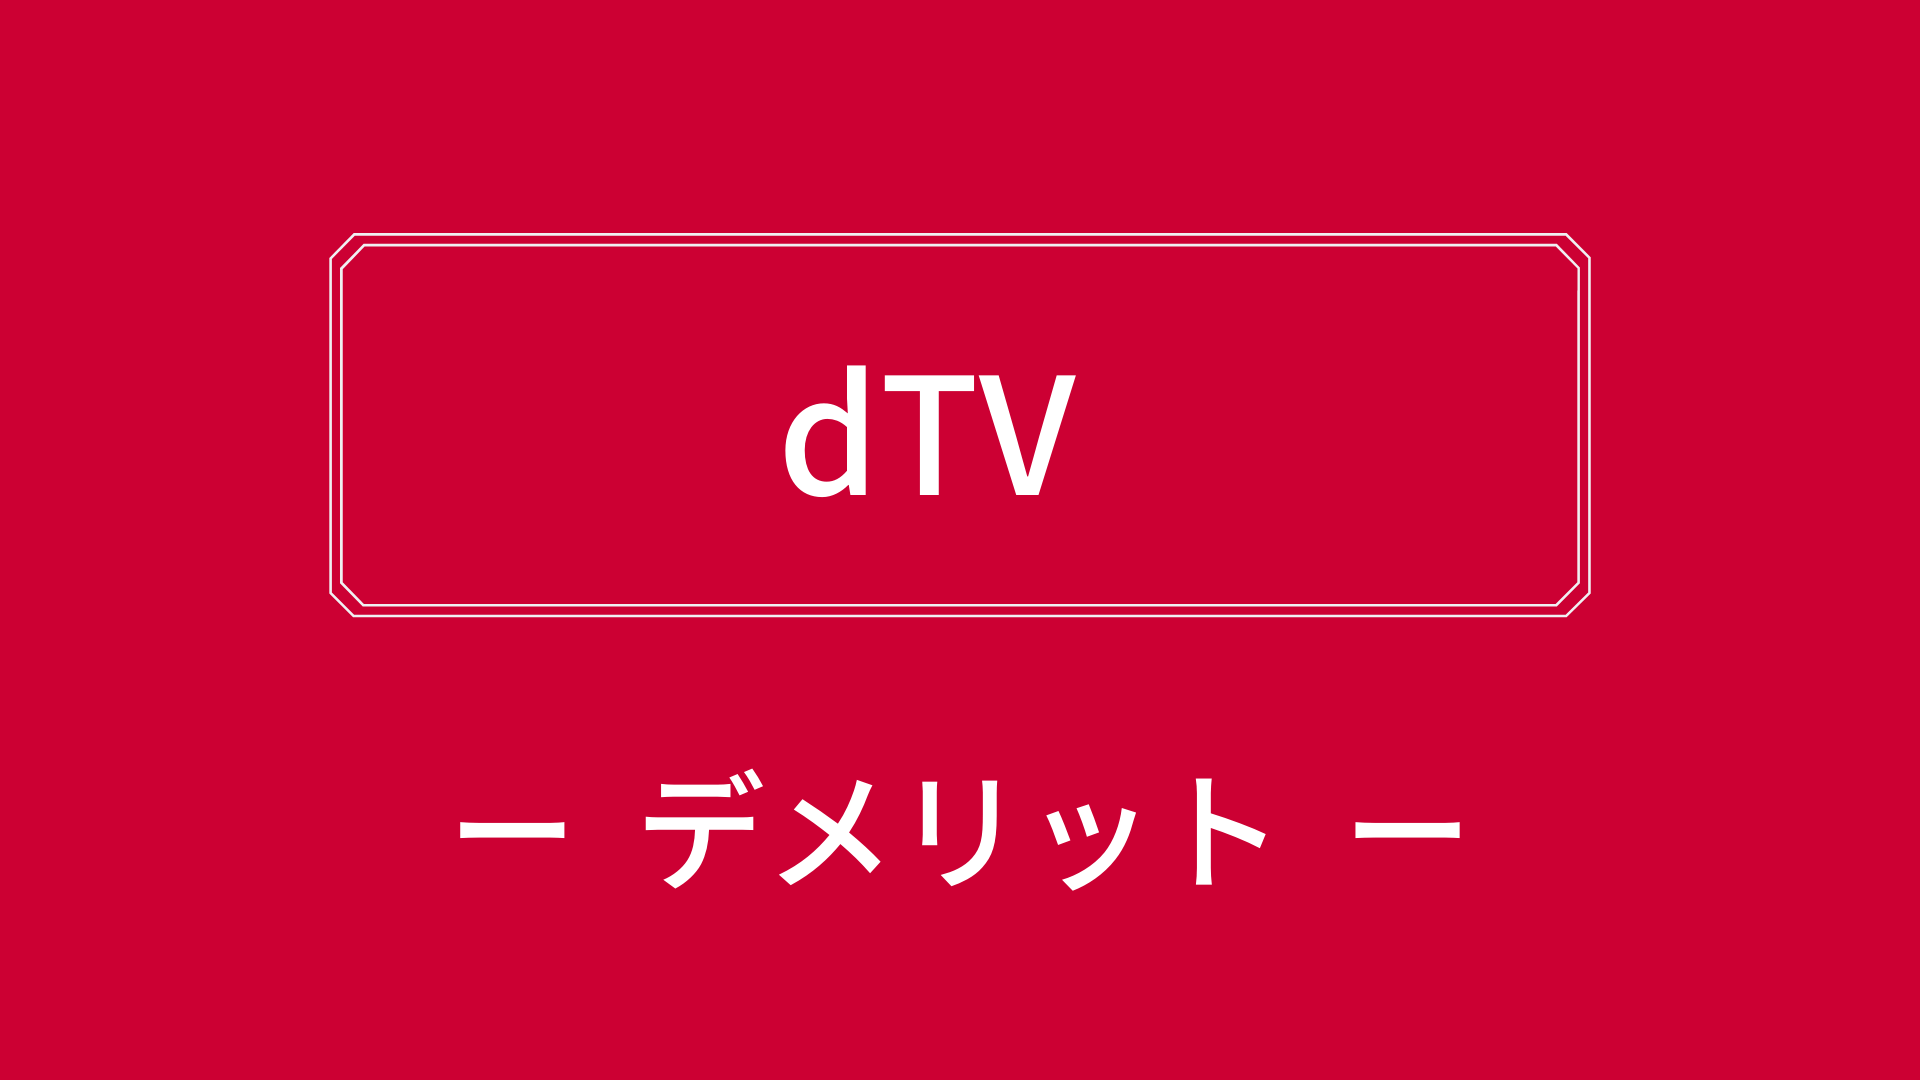 dTVのデメリット